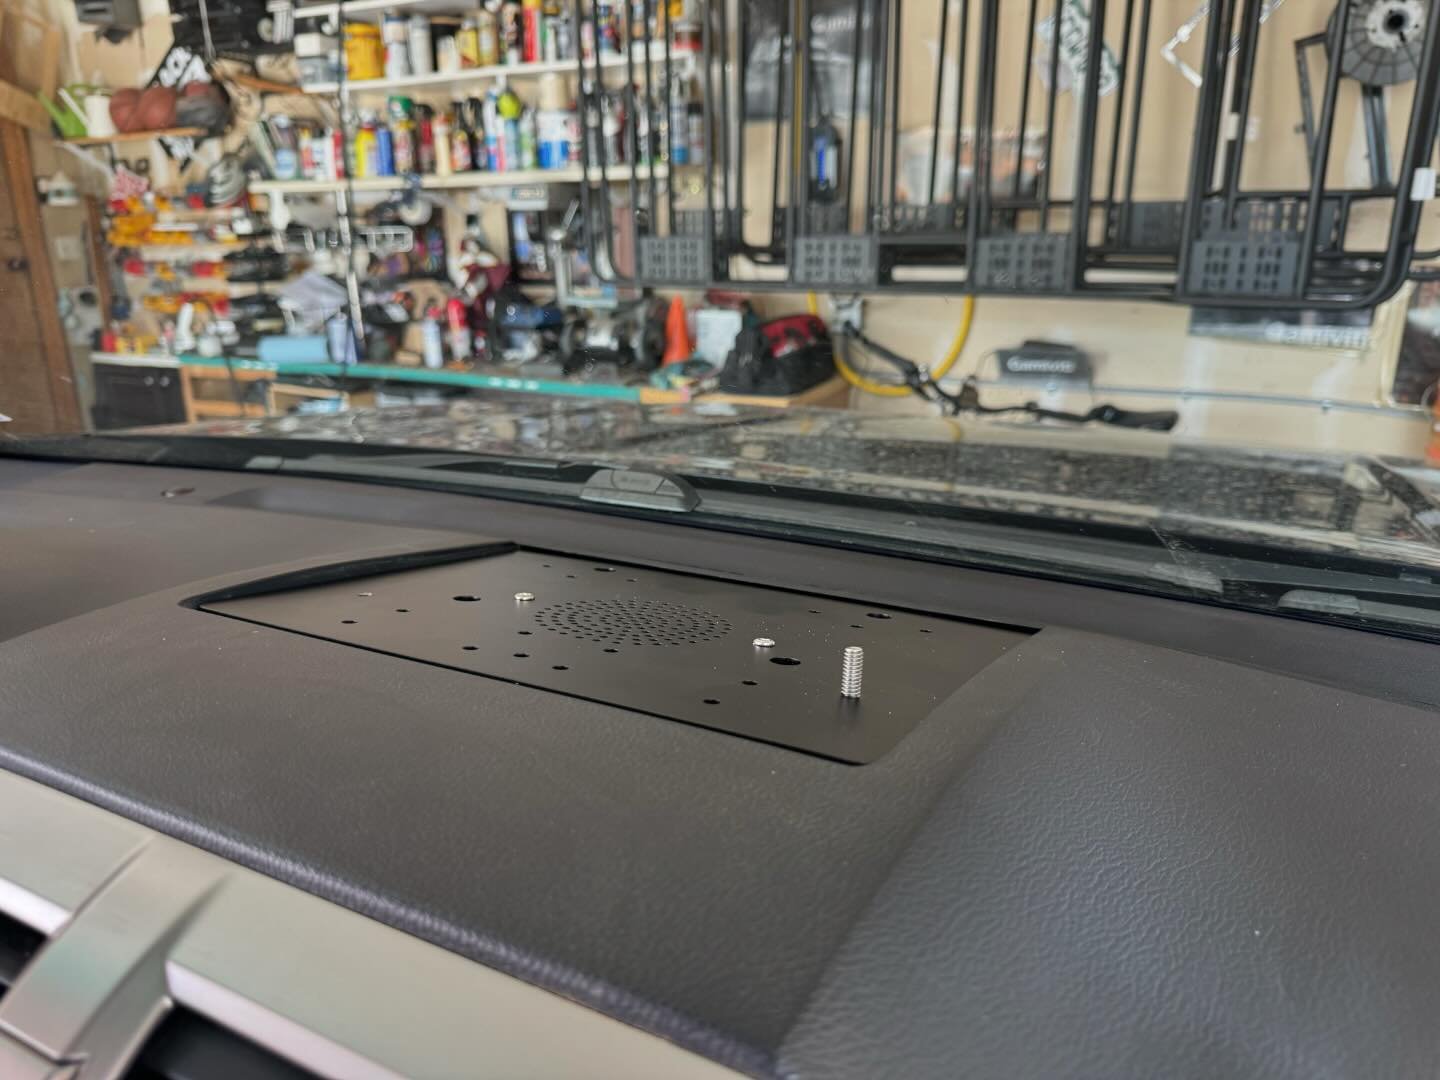 Gen2 #dashboardaccessory panel for the #gx460 is released and in stock.  No-drill install, matte finish, pre-drilled for any number of phone, tablet, charging, and gps accessories mounted to your dash.  See the video at https://www.gamiviti.com/dashb